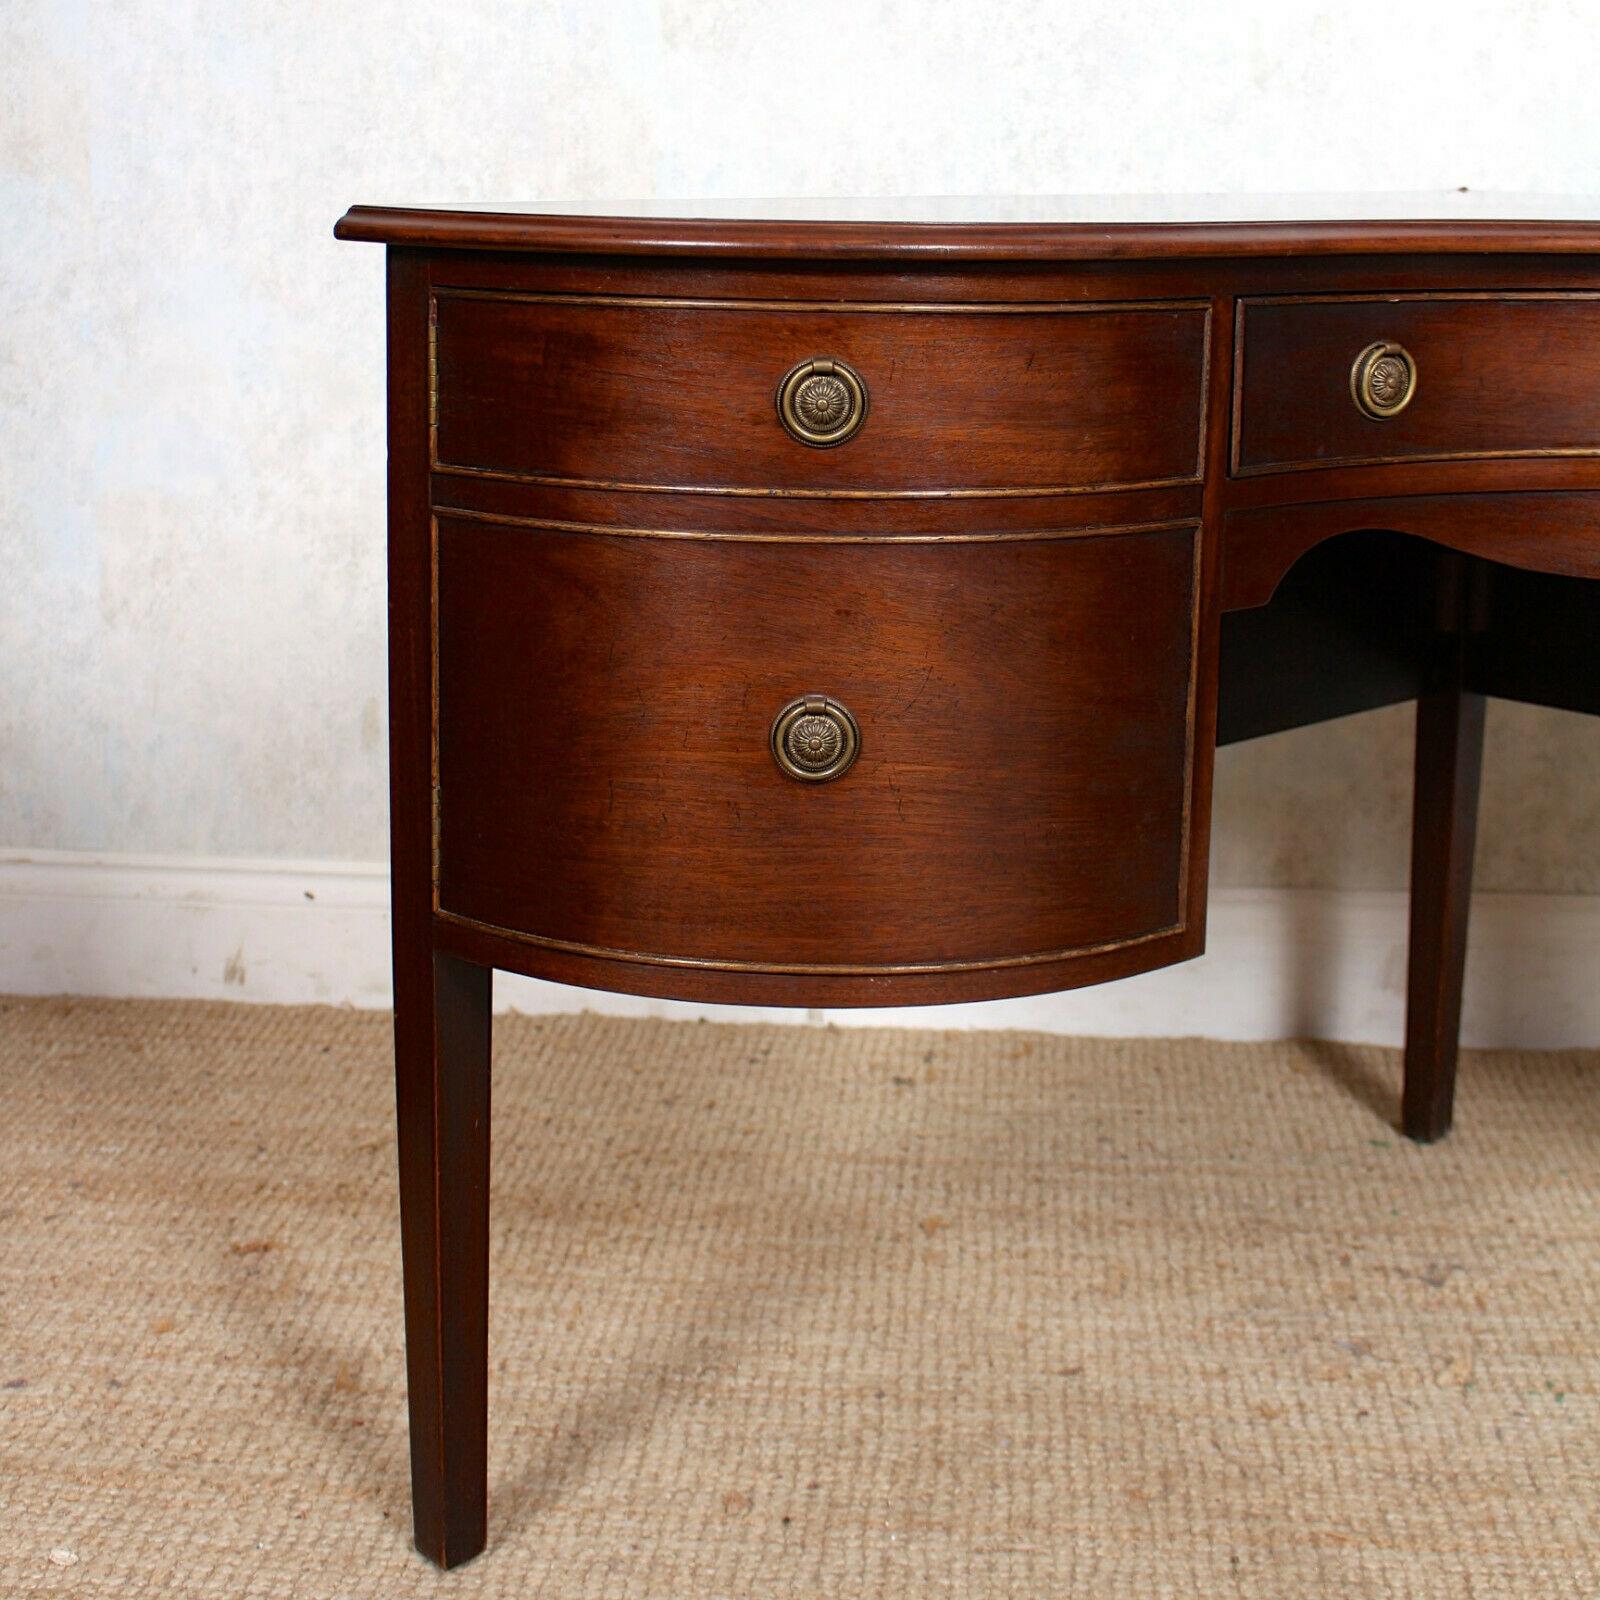 English Corner Desk Writing Table Bevan Funnell Mahogany Antique Vintage In Good Condition For Sale In Newcastle upon Tyne, GB